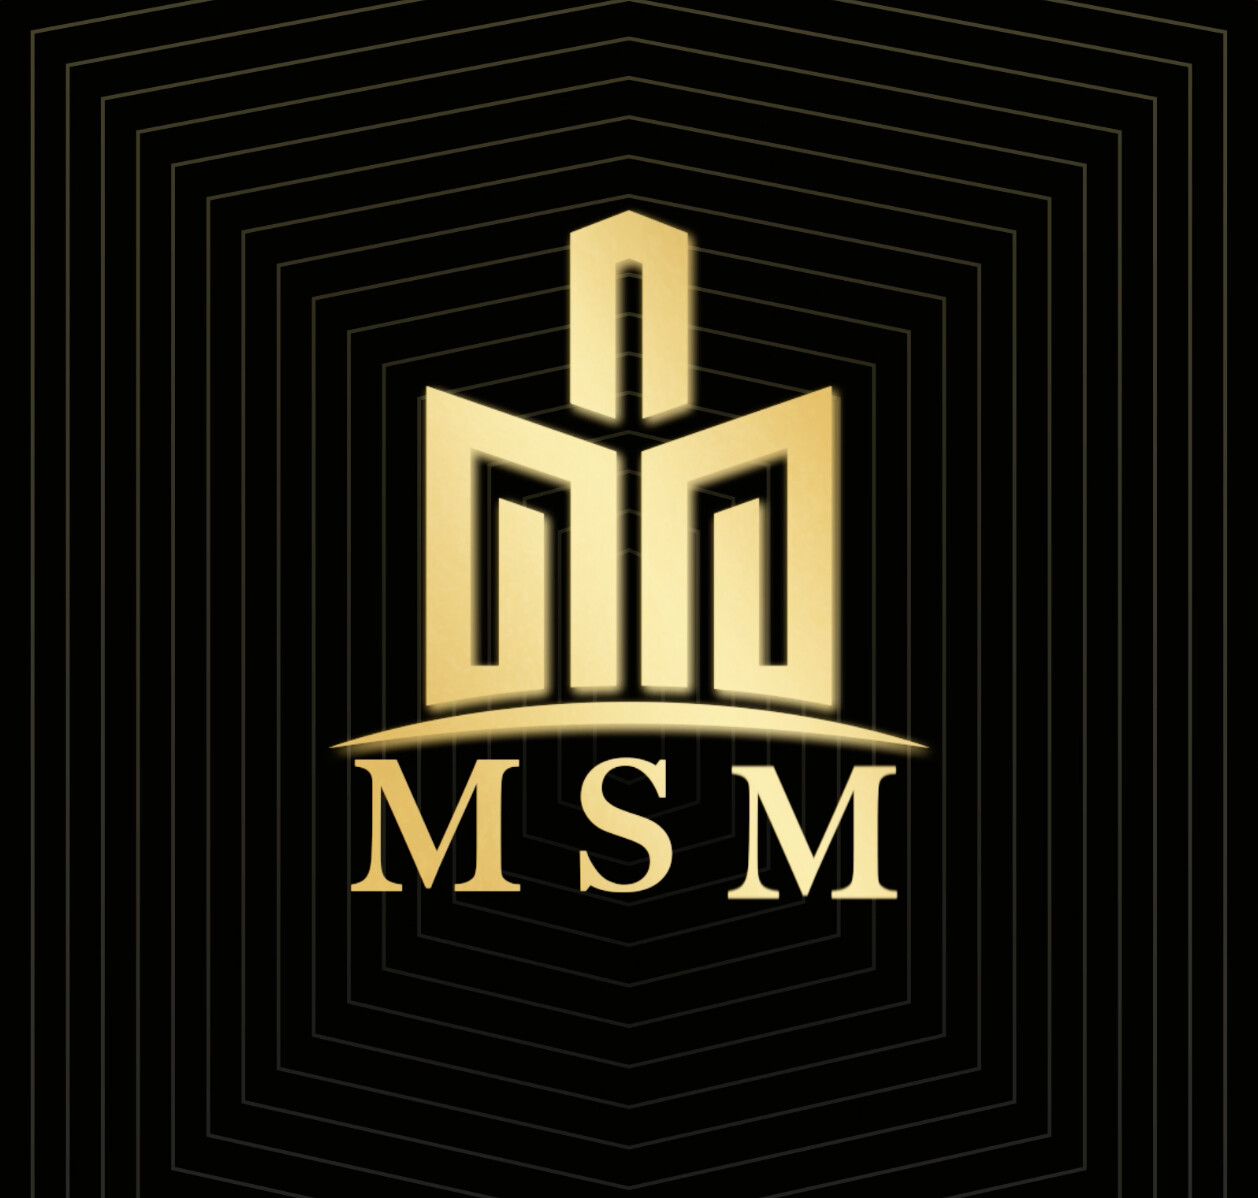 Download Msm Logo-01 PNG Image with No Background - PNGkey.com